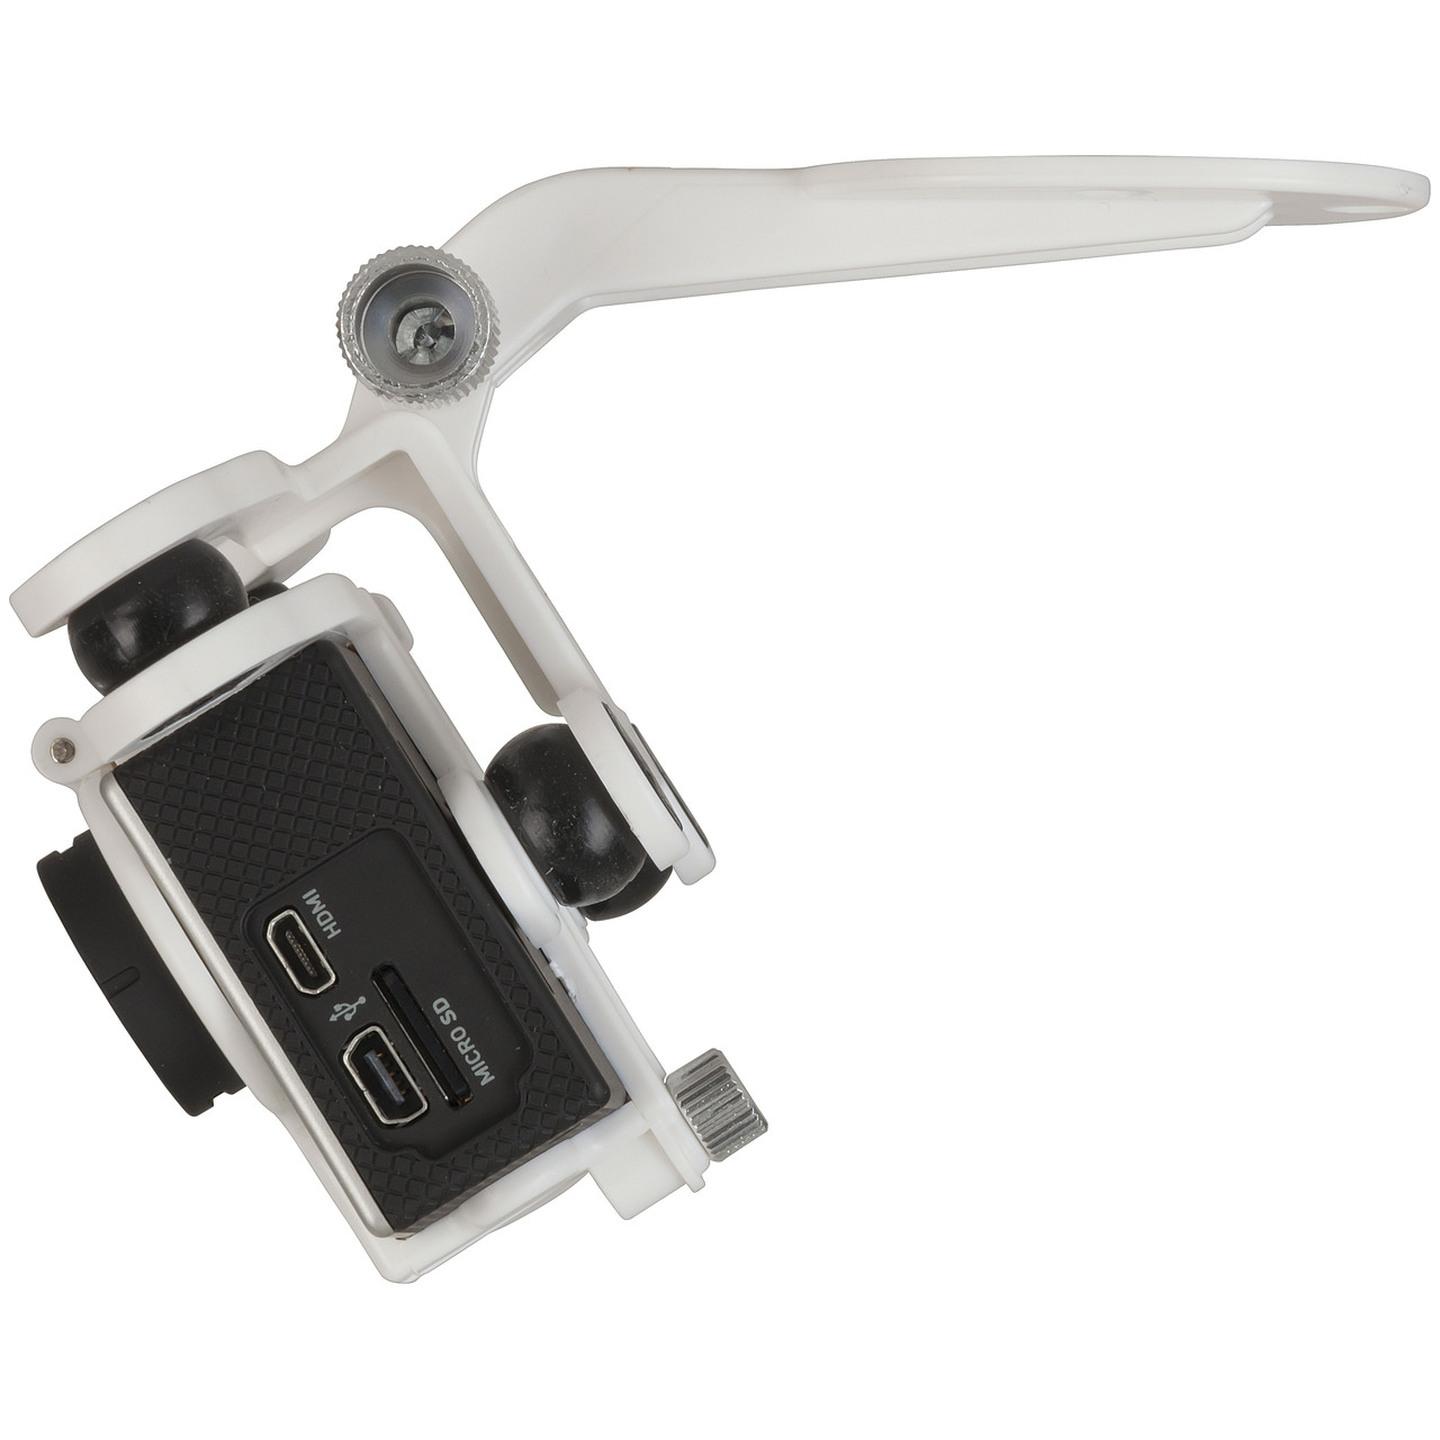 Action Camera Mount Bracket to suit GT-4040